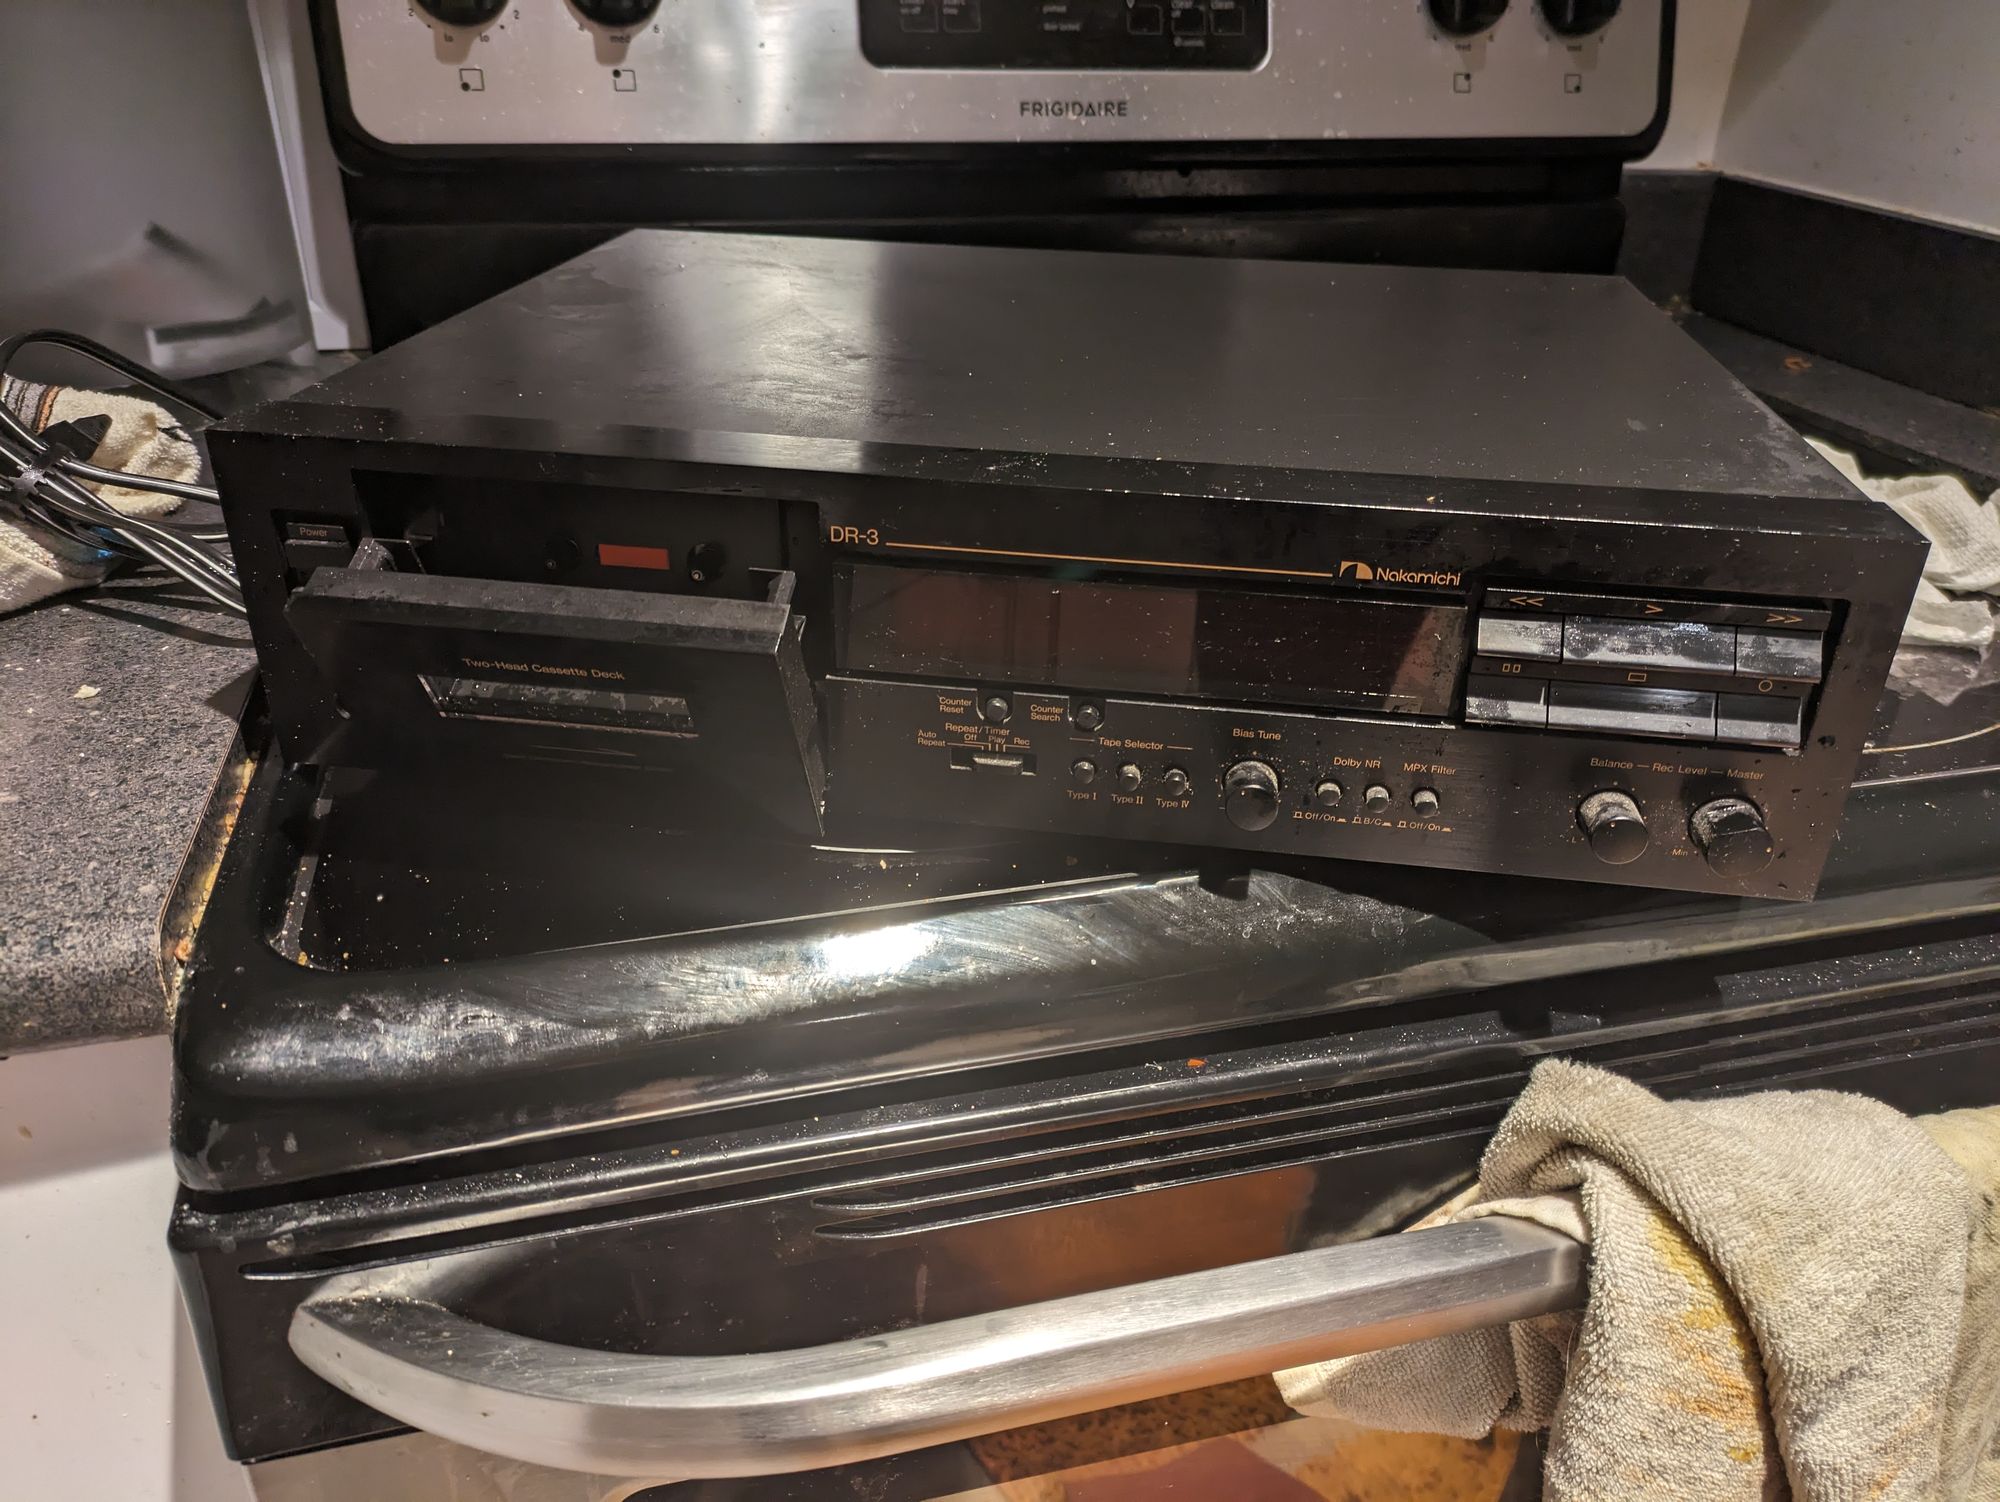 A picture of the Nakamichi DR-3 on top of a ceramic stove